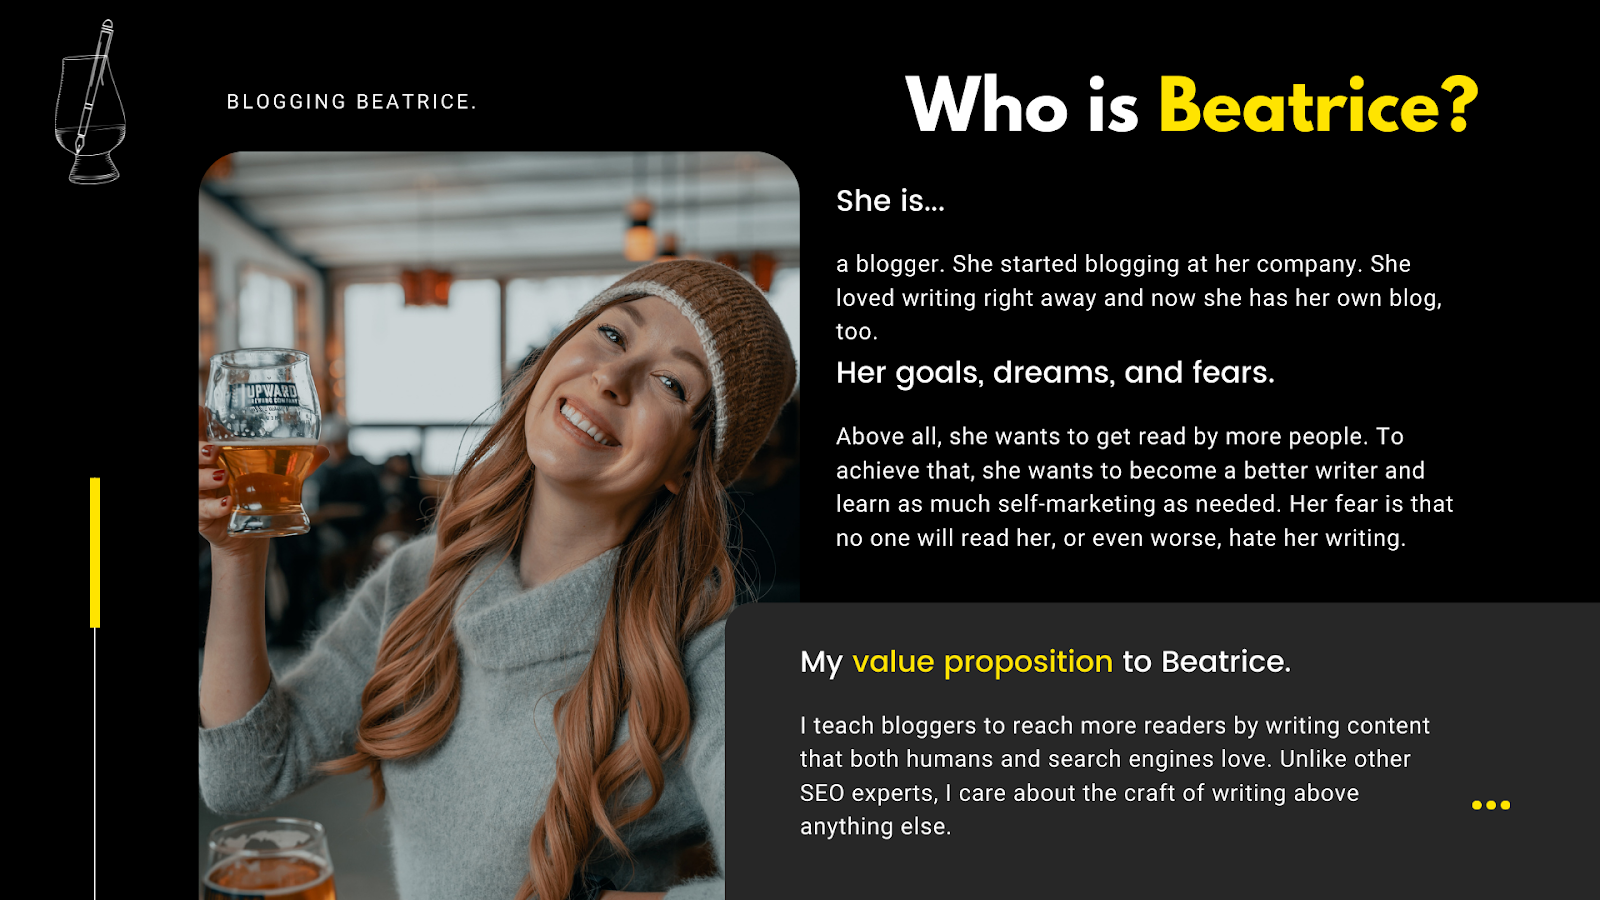 Copyneat persona called Blogging Beatrice (a blogger who started blogging at her company and loved writing right away and now she has her own blog, too).